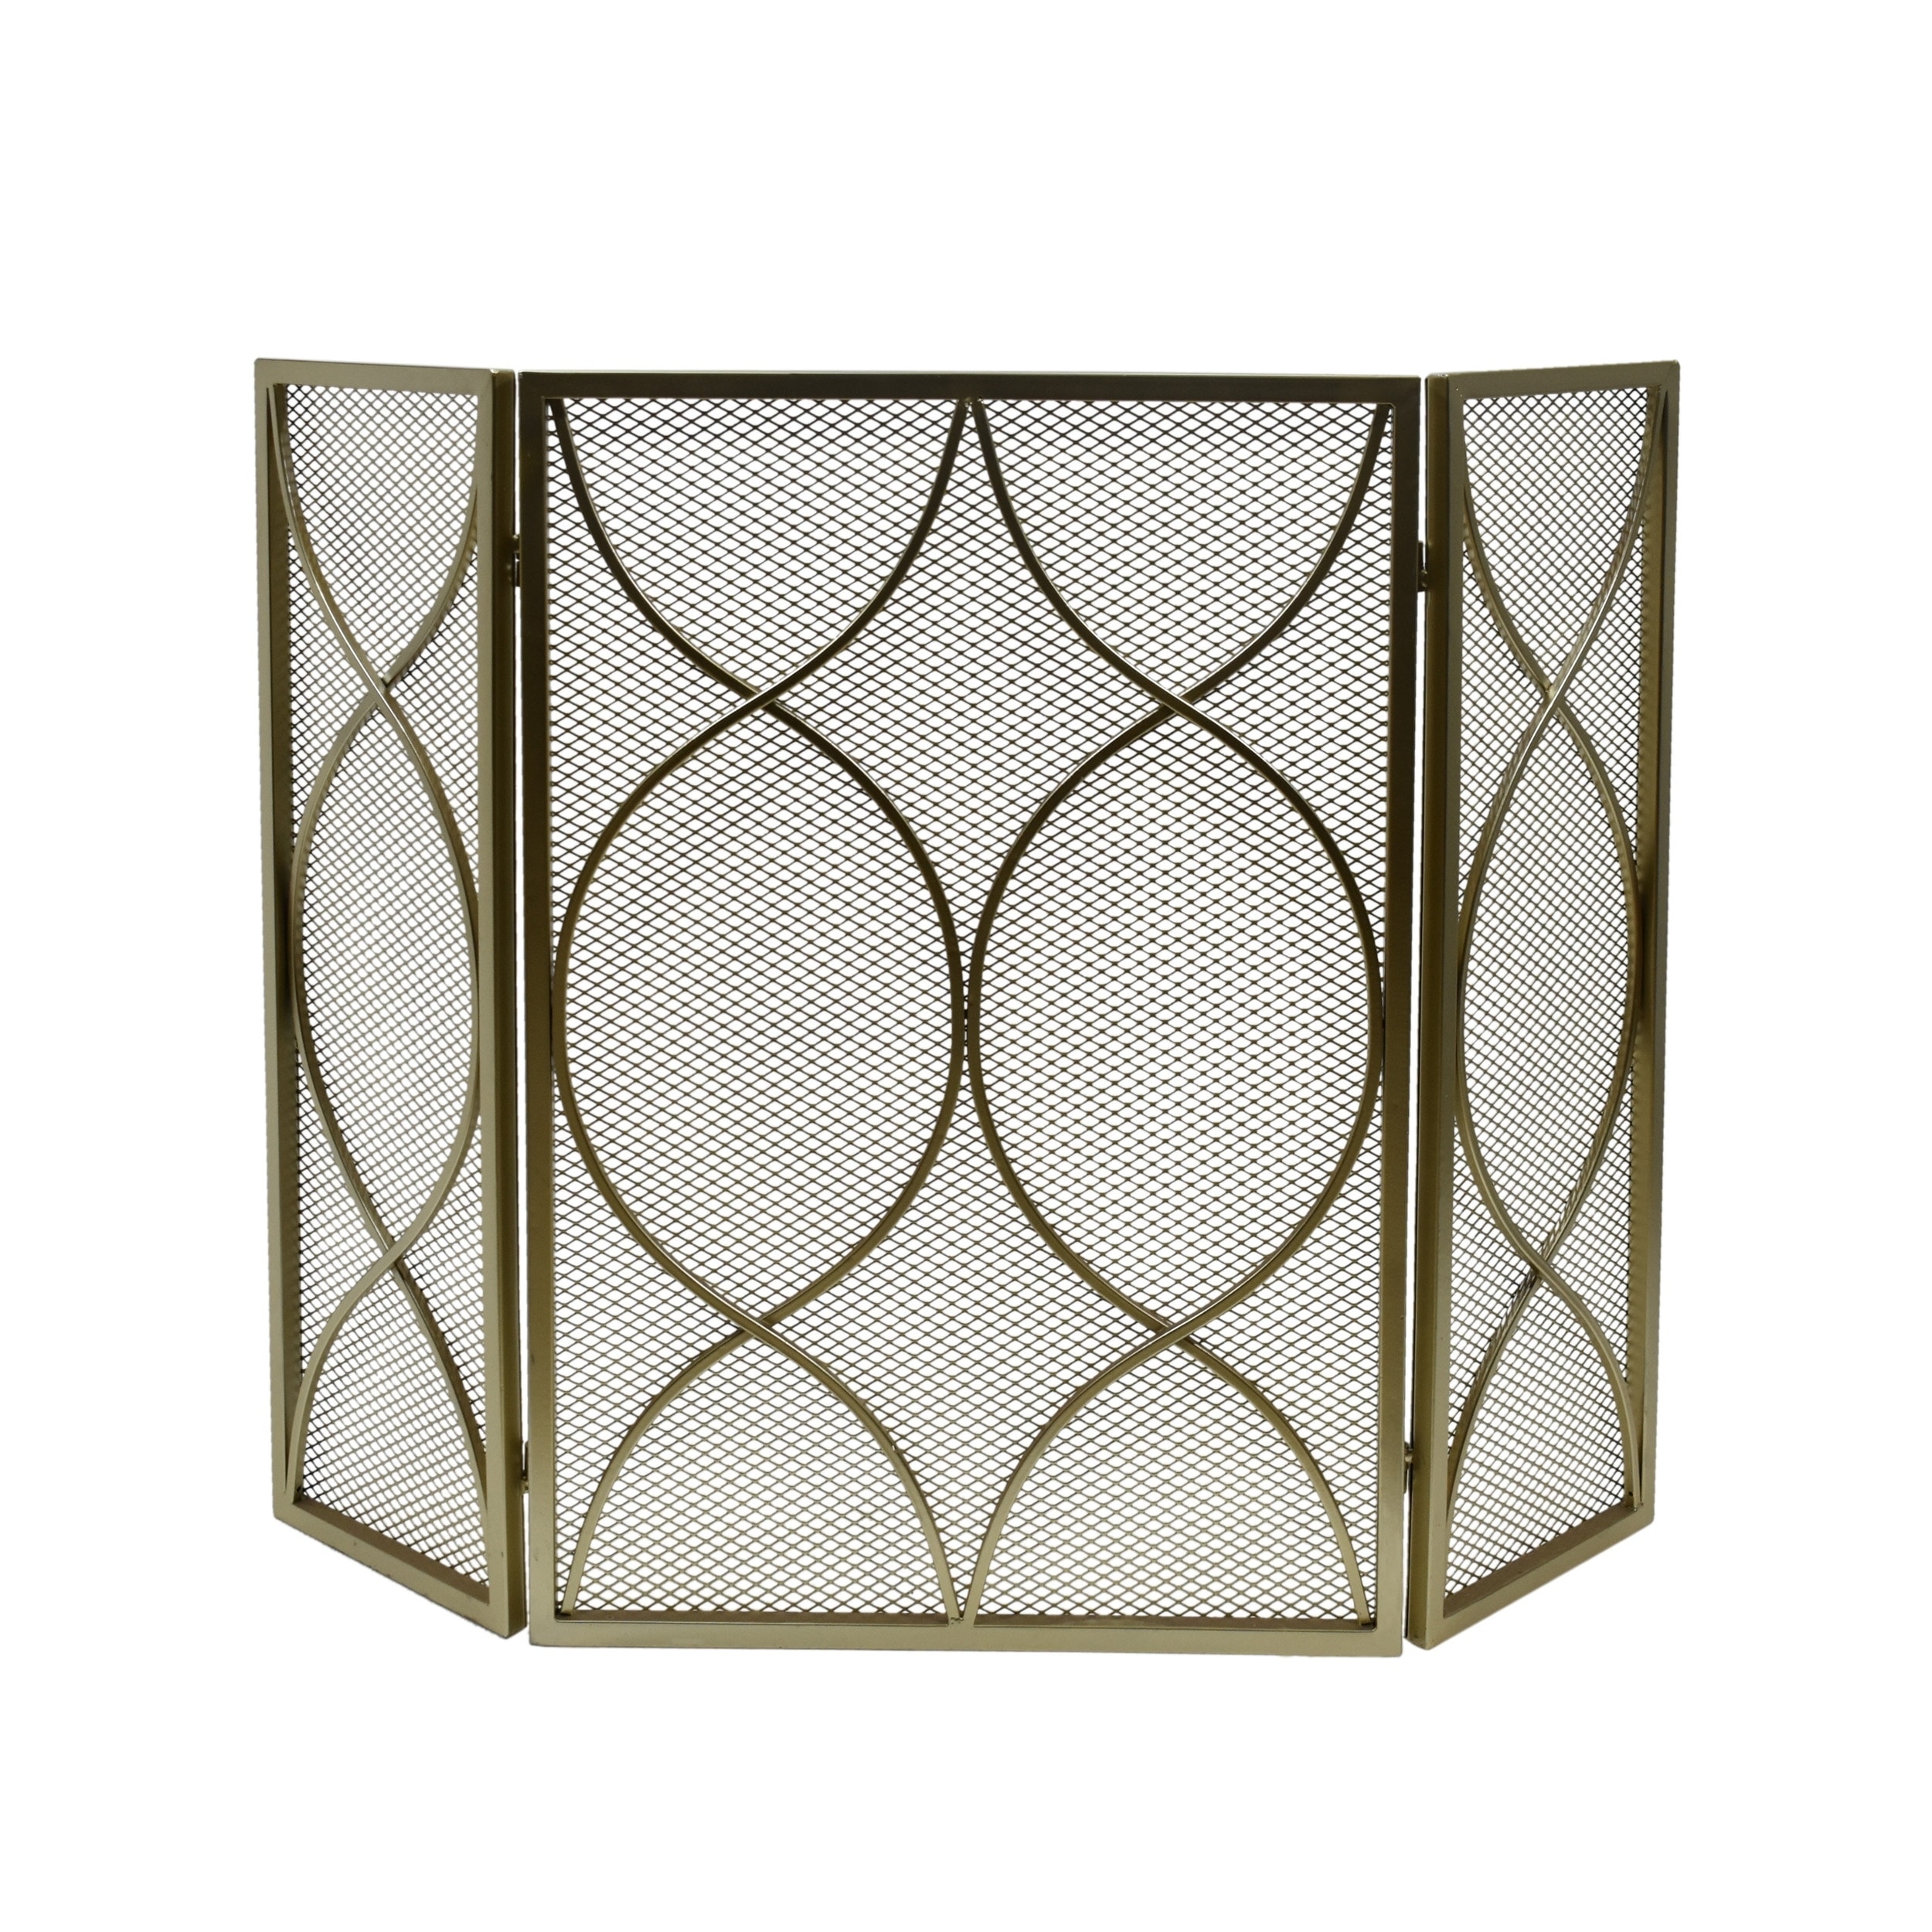 Christopher Knight Home Amiyah Panelled Iron Fireplace Screen, Gold - 4